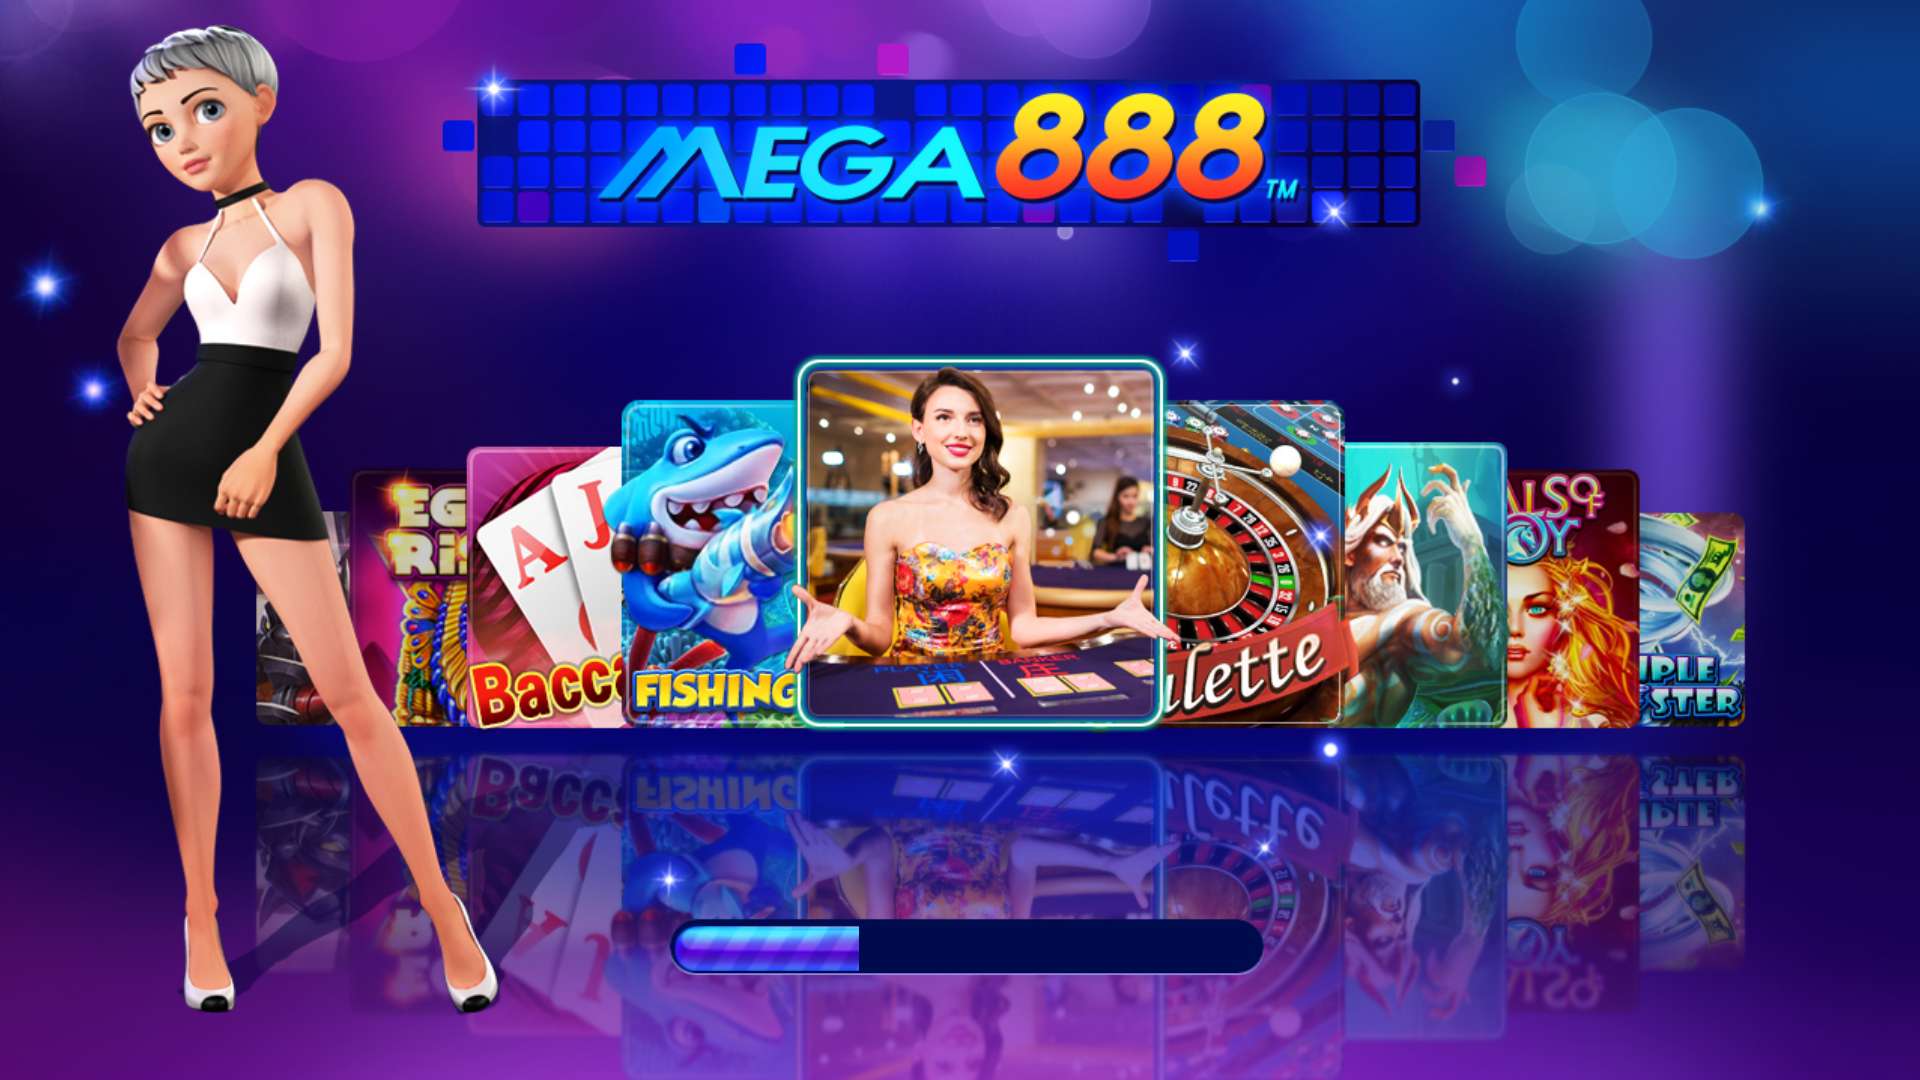 HOW TO GET FREE CREDIT ON MEGA888